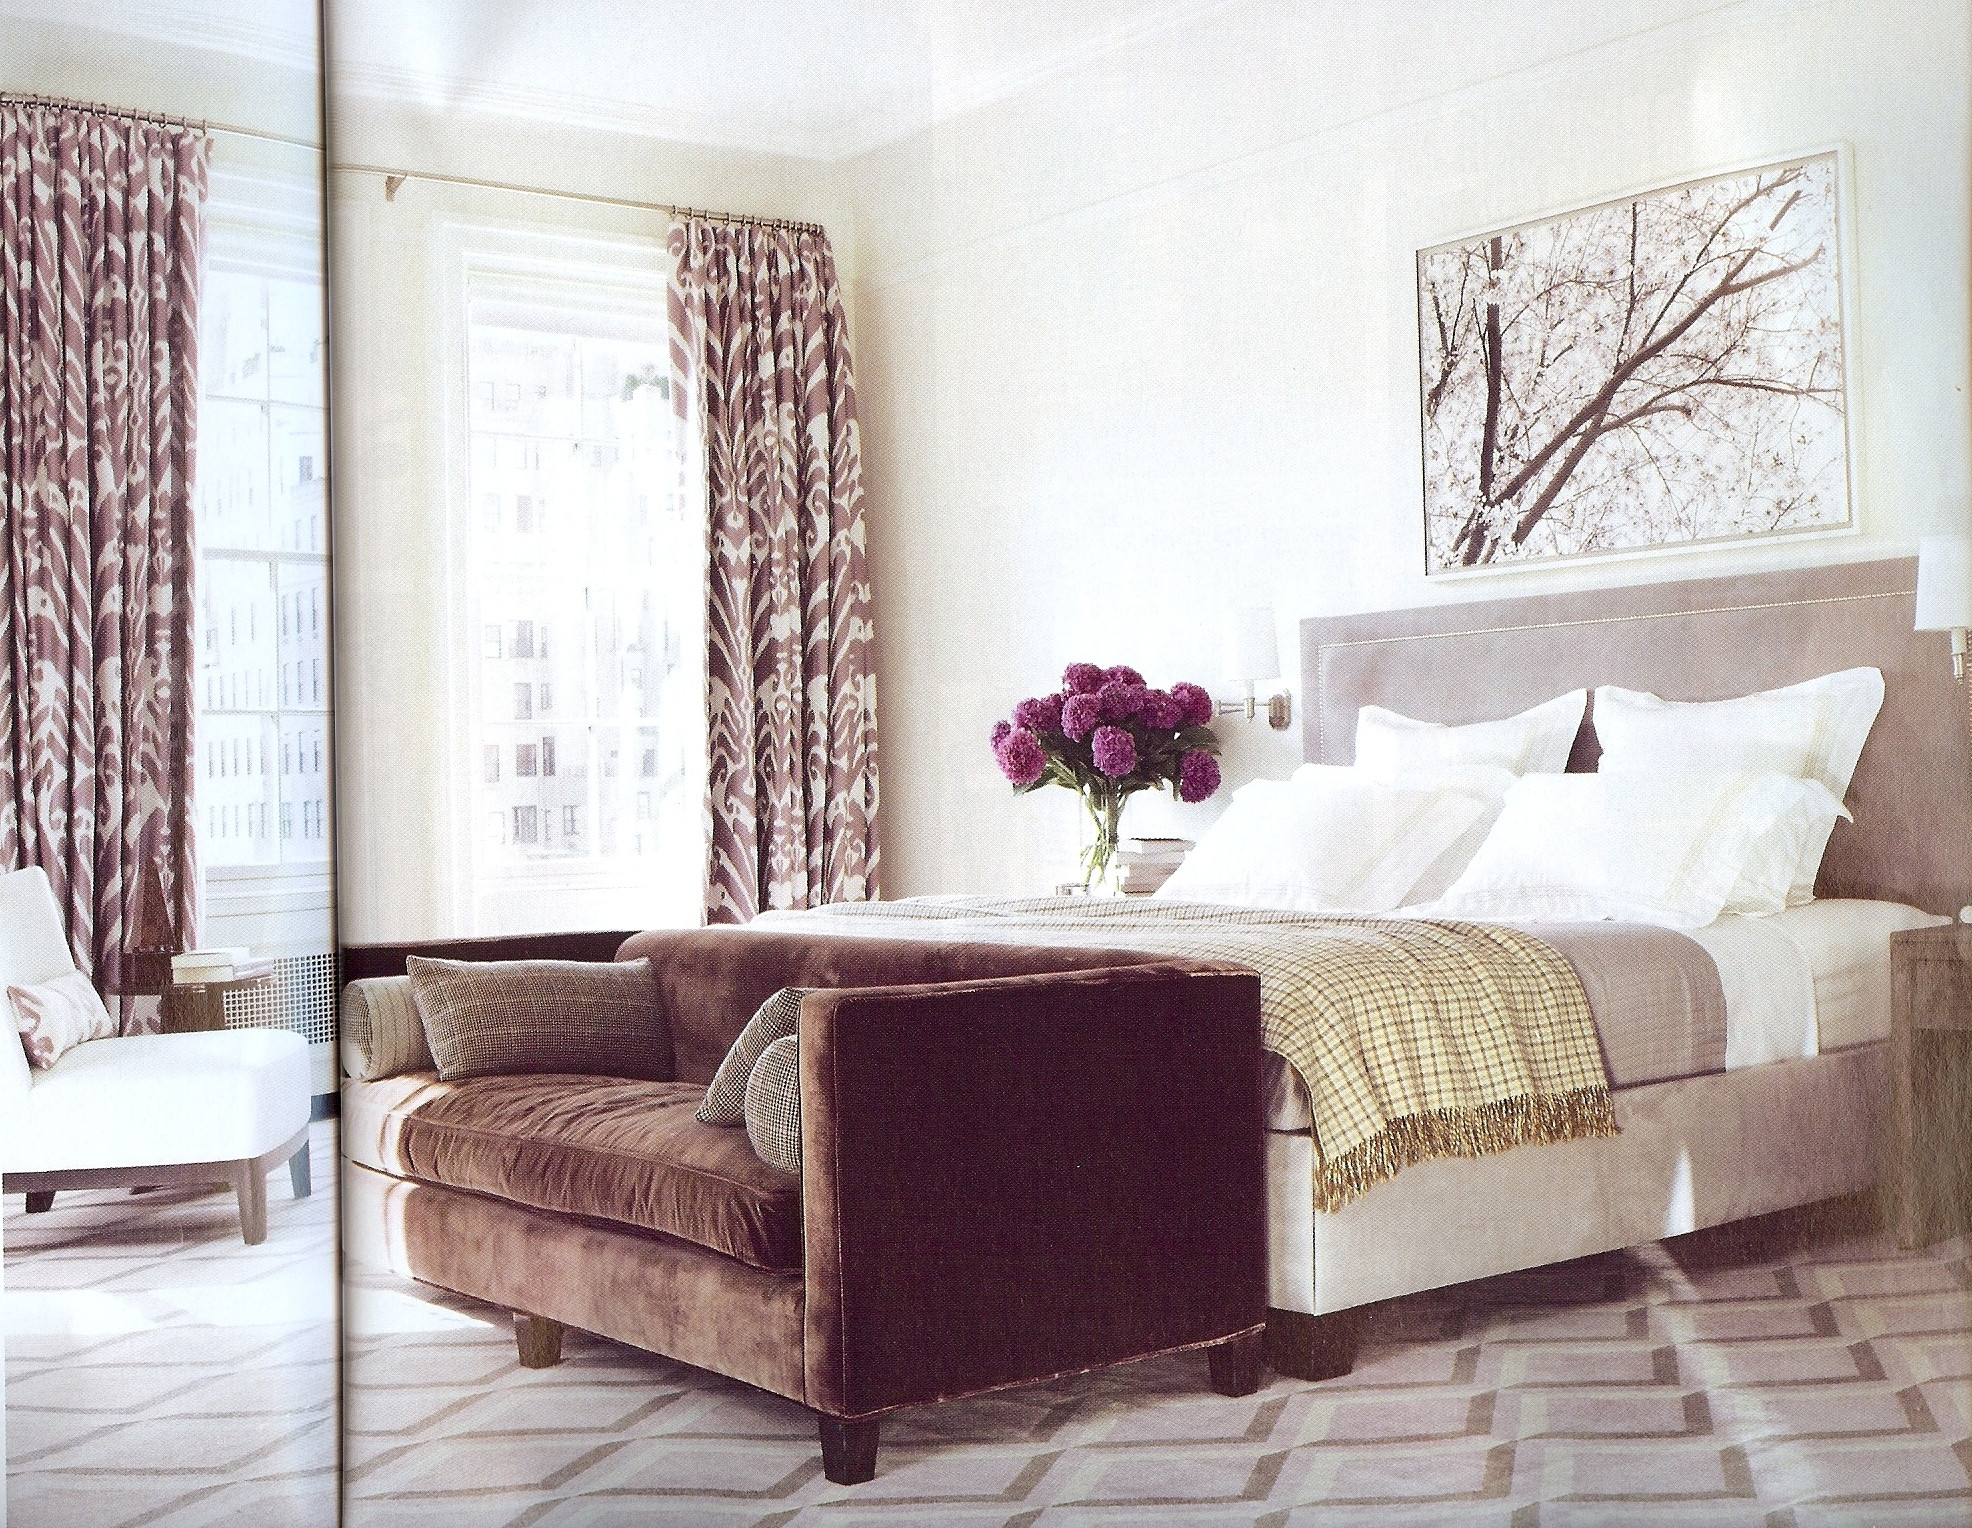 Elle Decor Bedroom
 Our Favorite Bedrooms for now